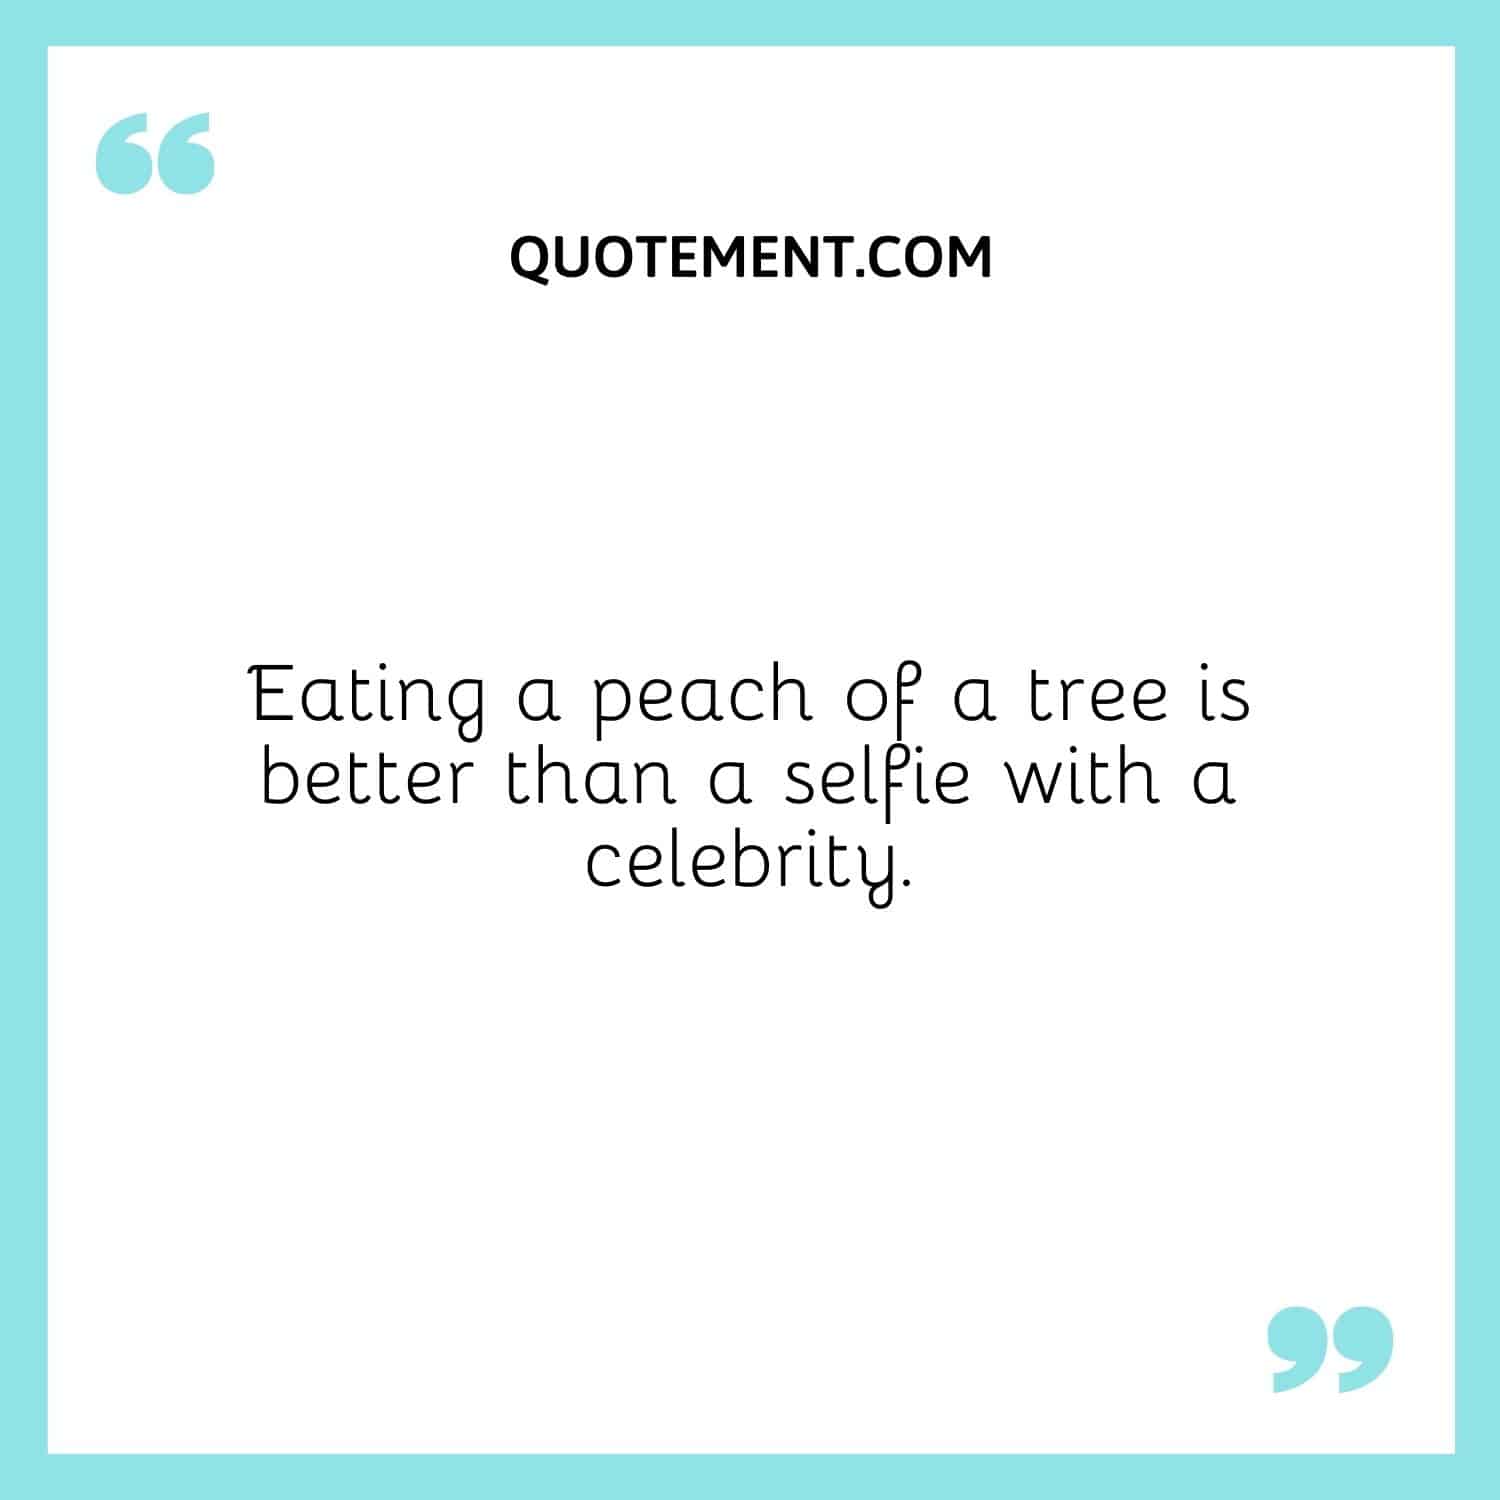 Eating a peach of a tree is better than a selfie with a celebrity.